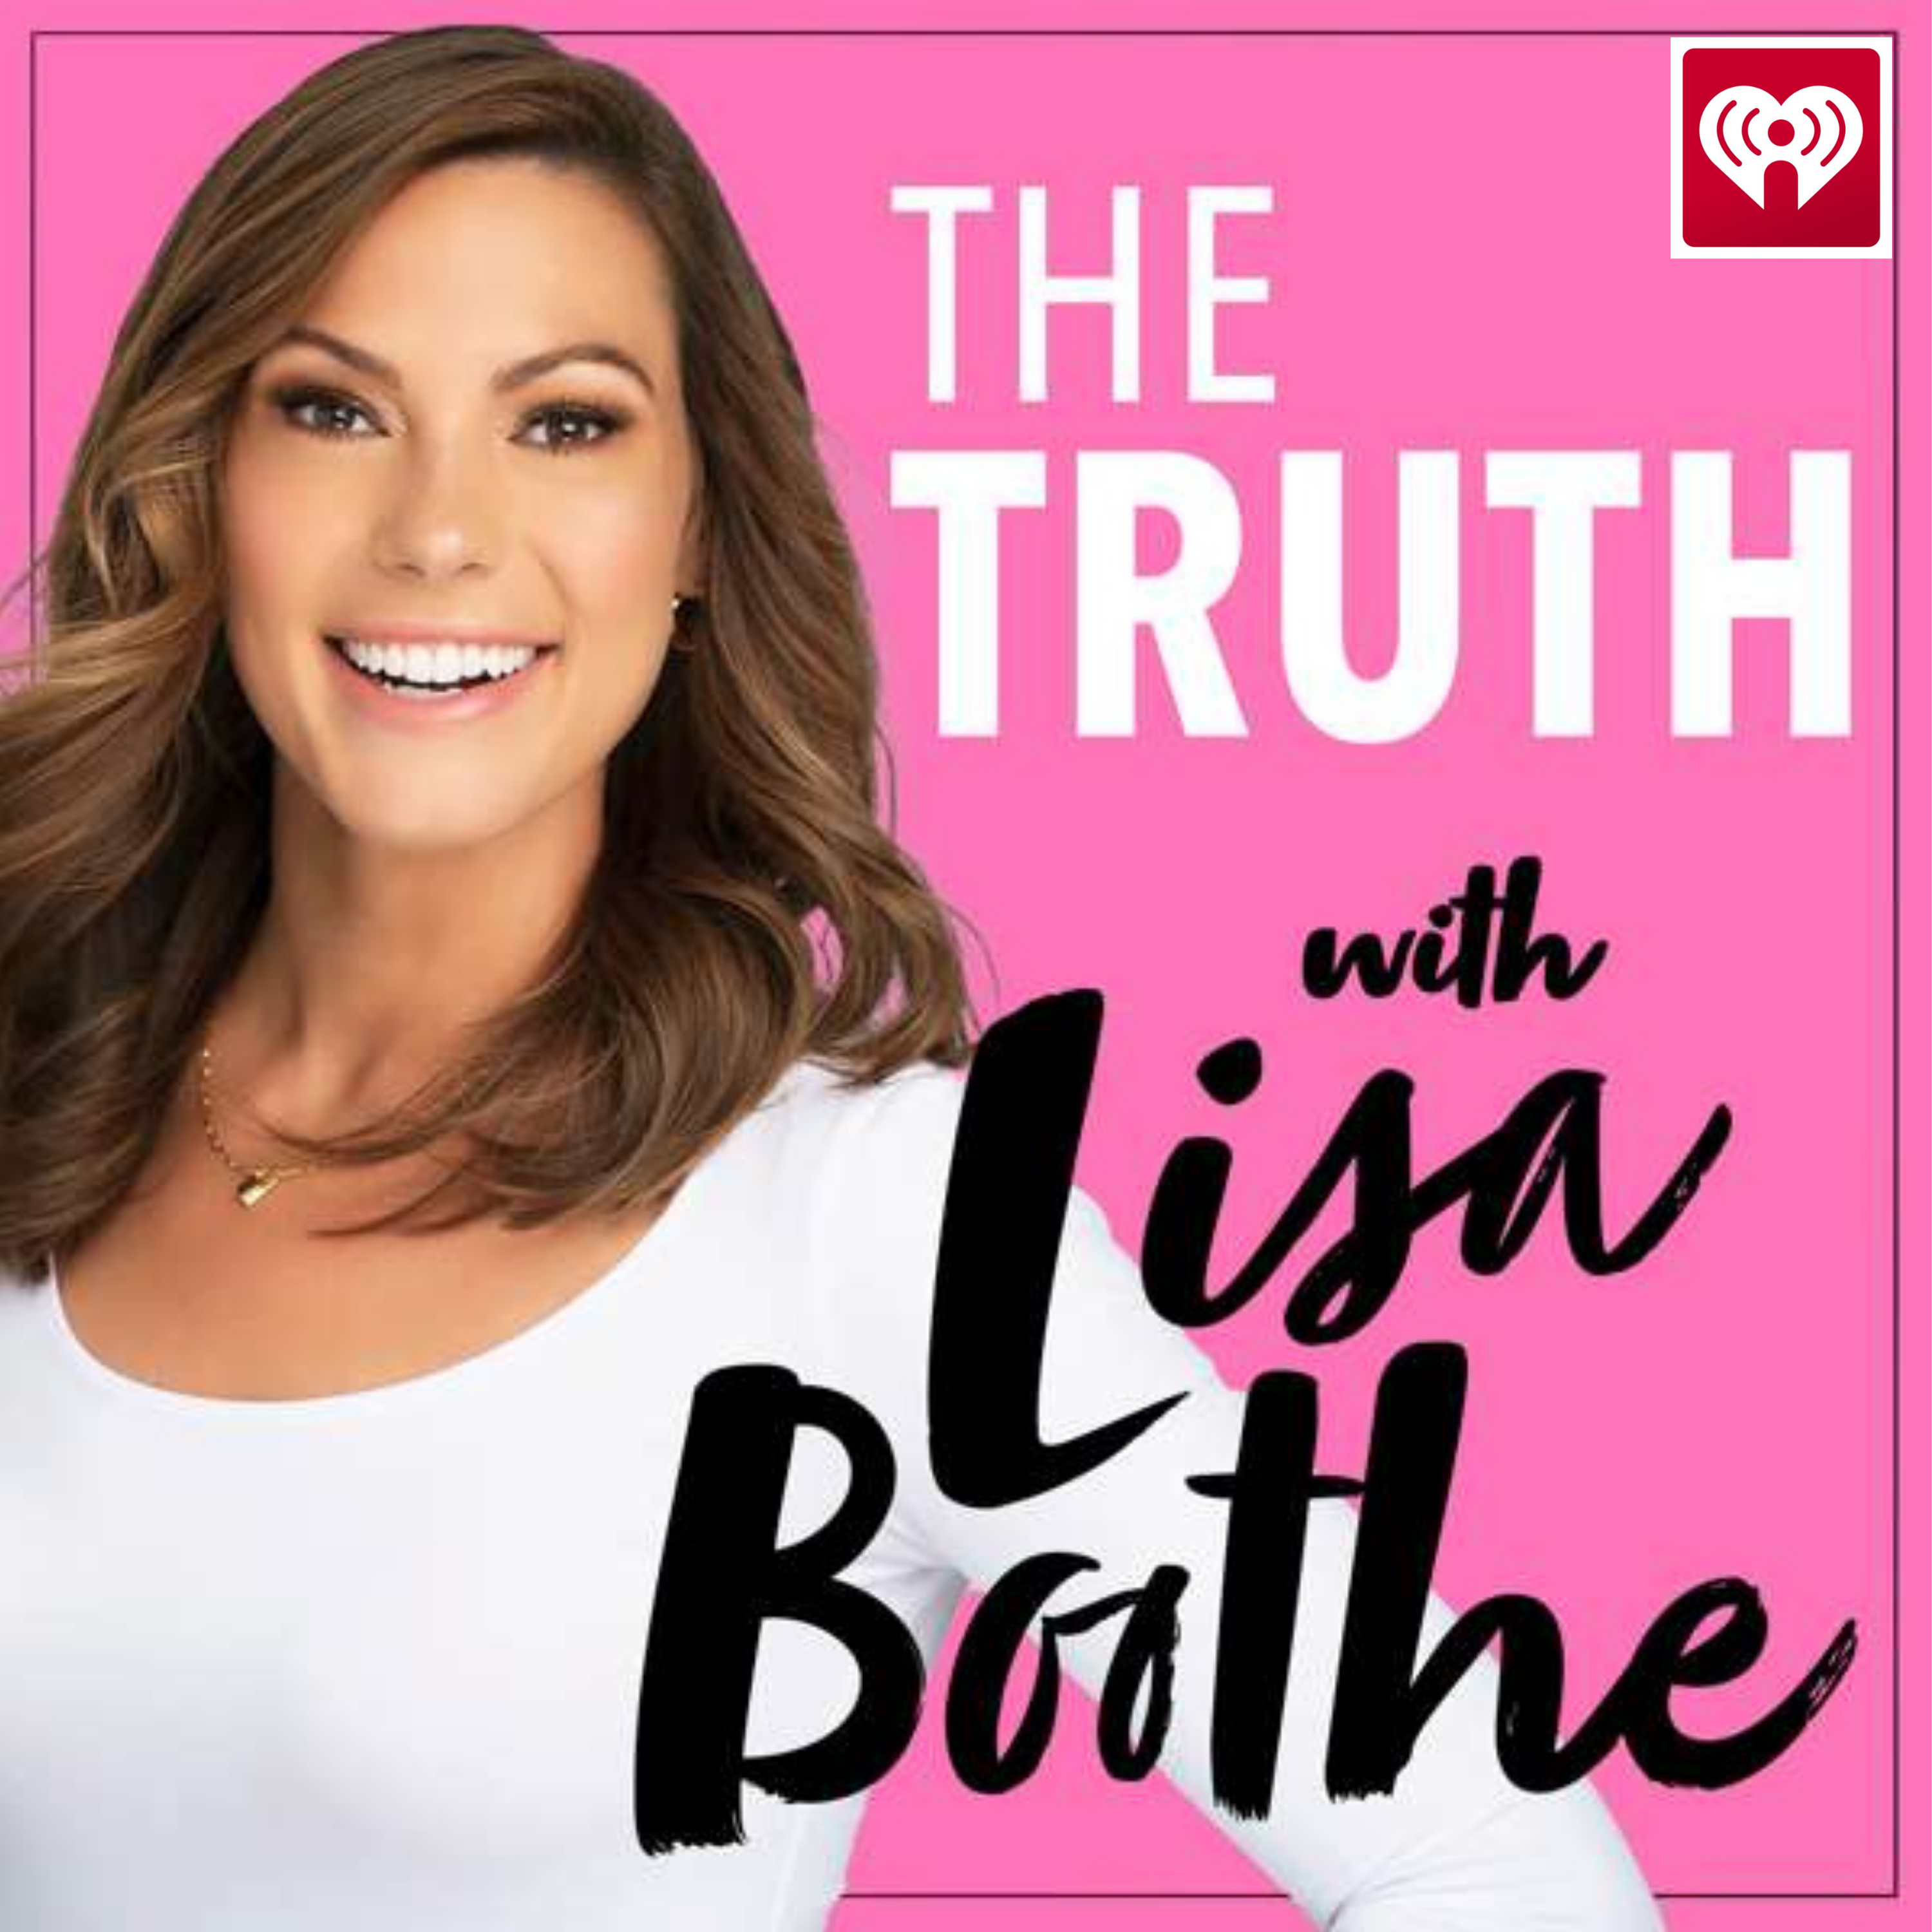 The Truth with Lisa Boothe: Confronting Anti-Semitism on Campus with Rep. Virginia Foxx